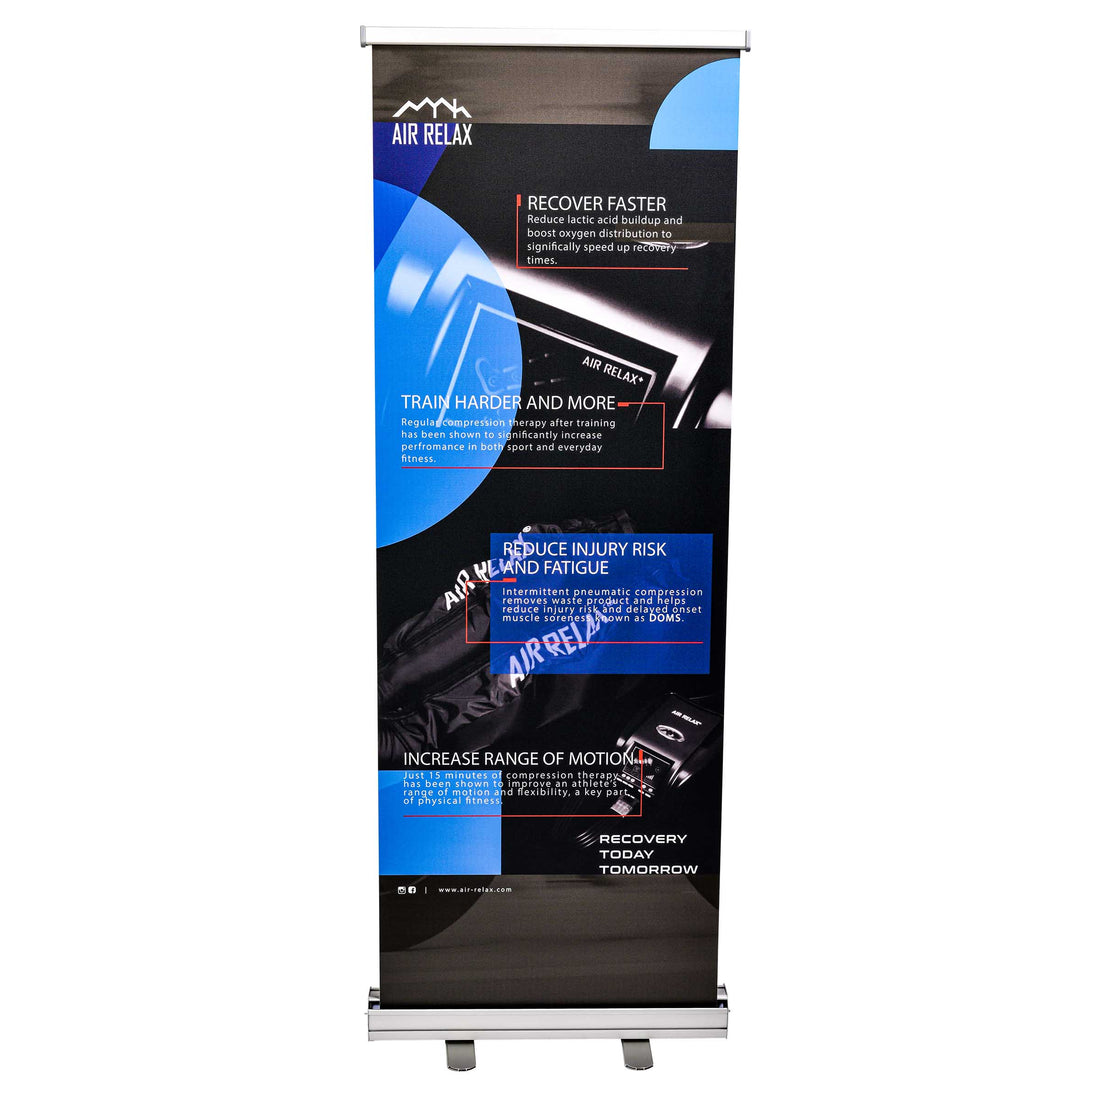 RETRACTABLE AIR RELAX BANNER